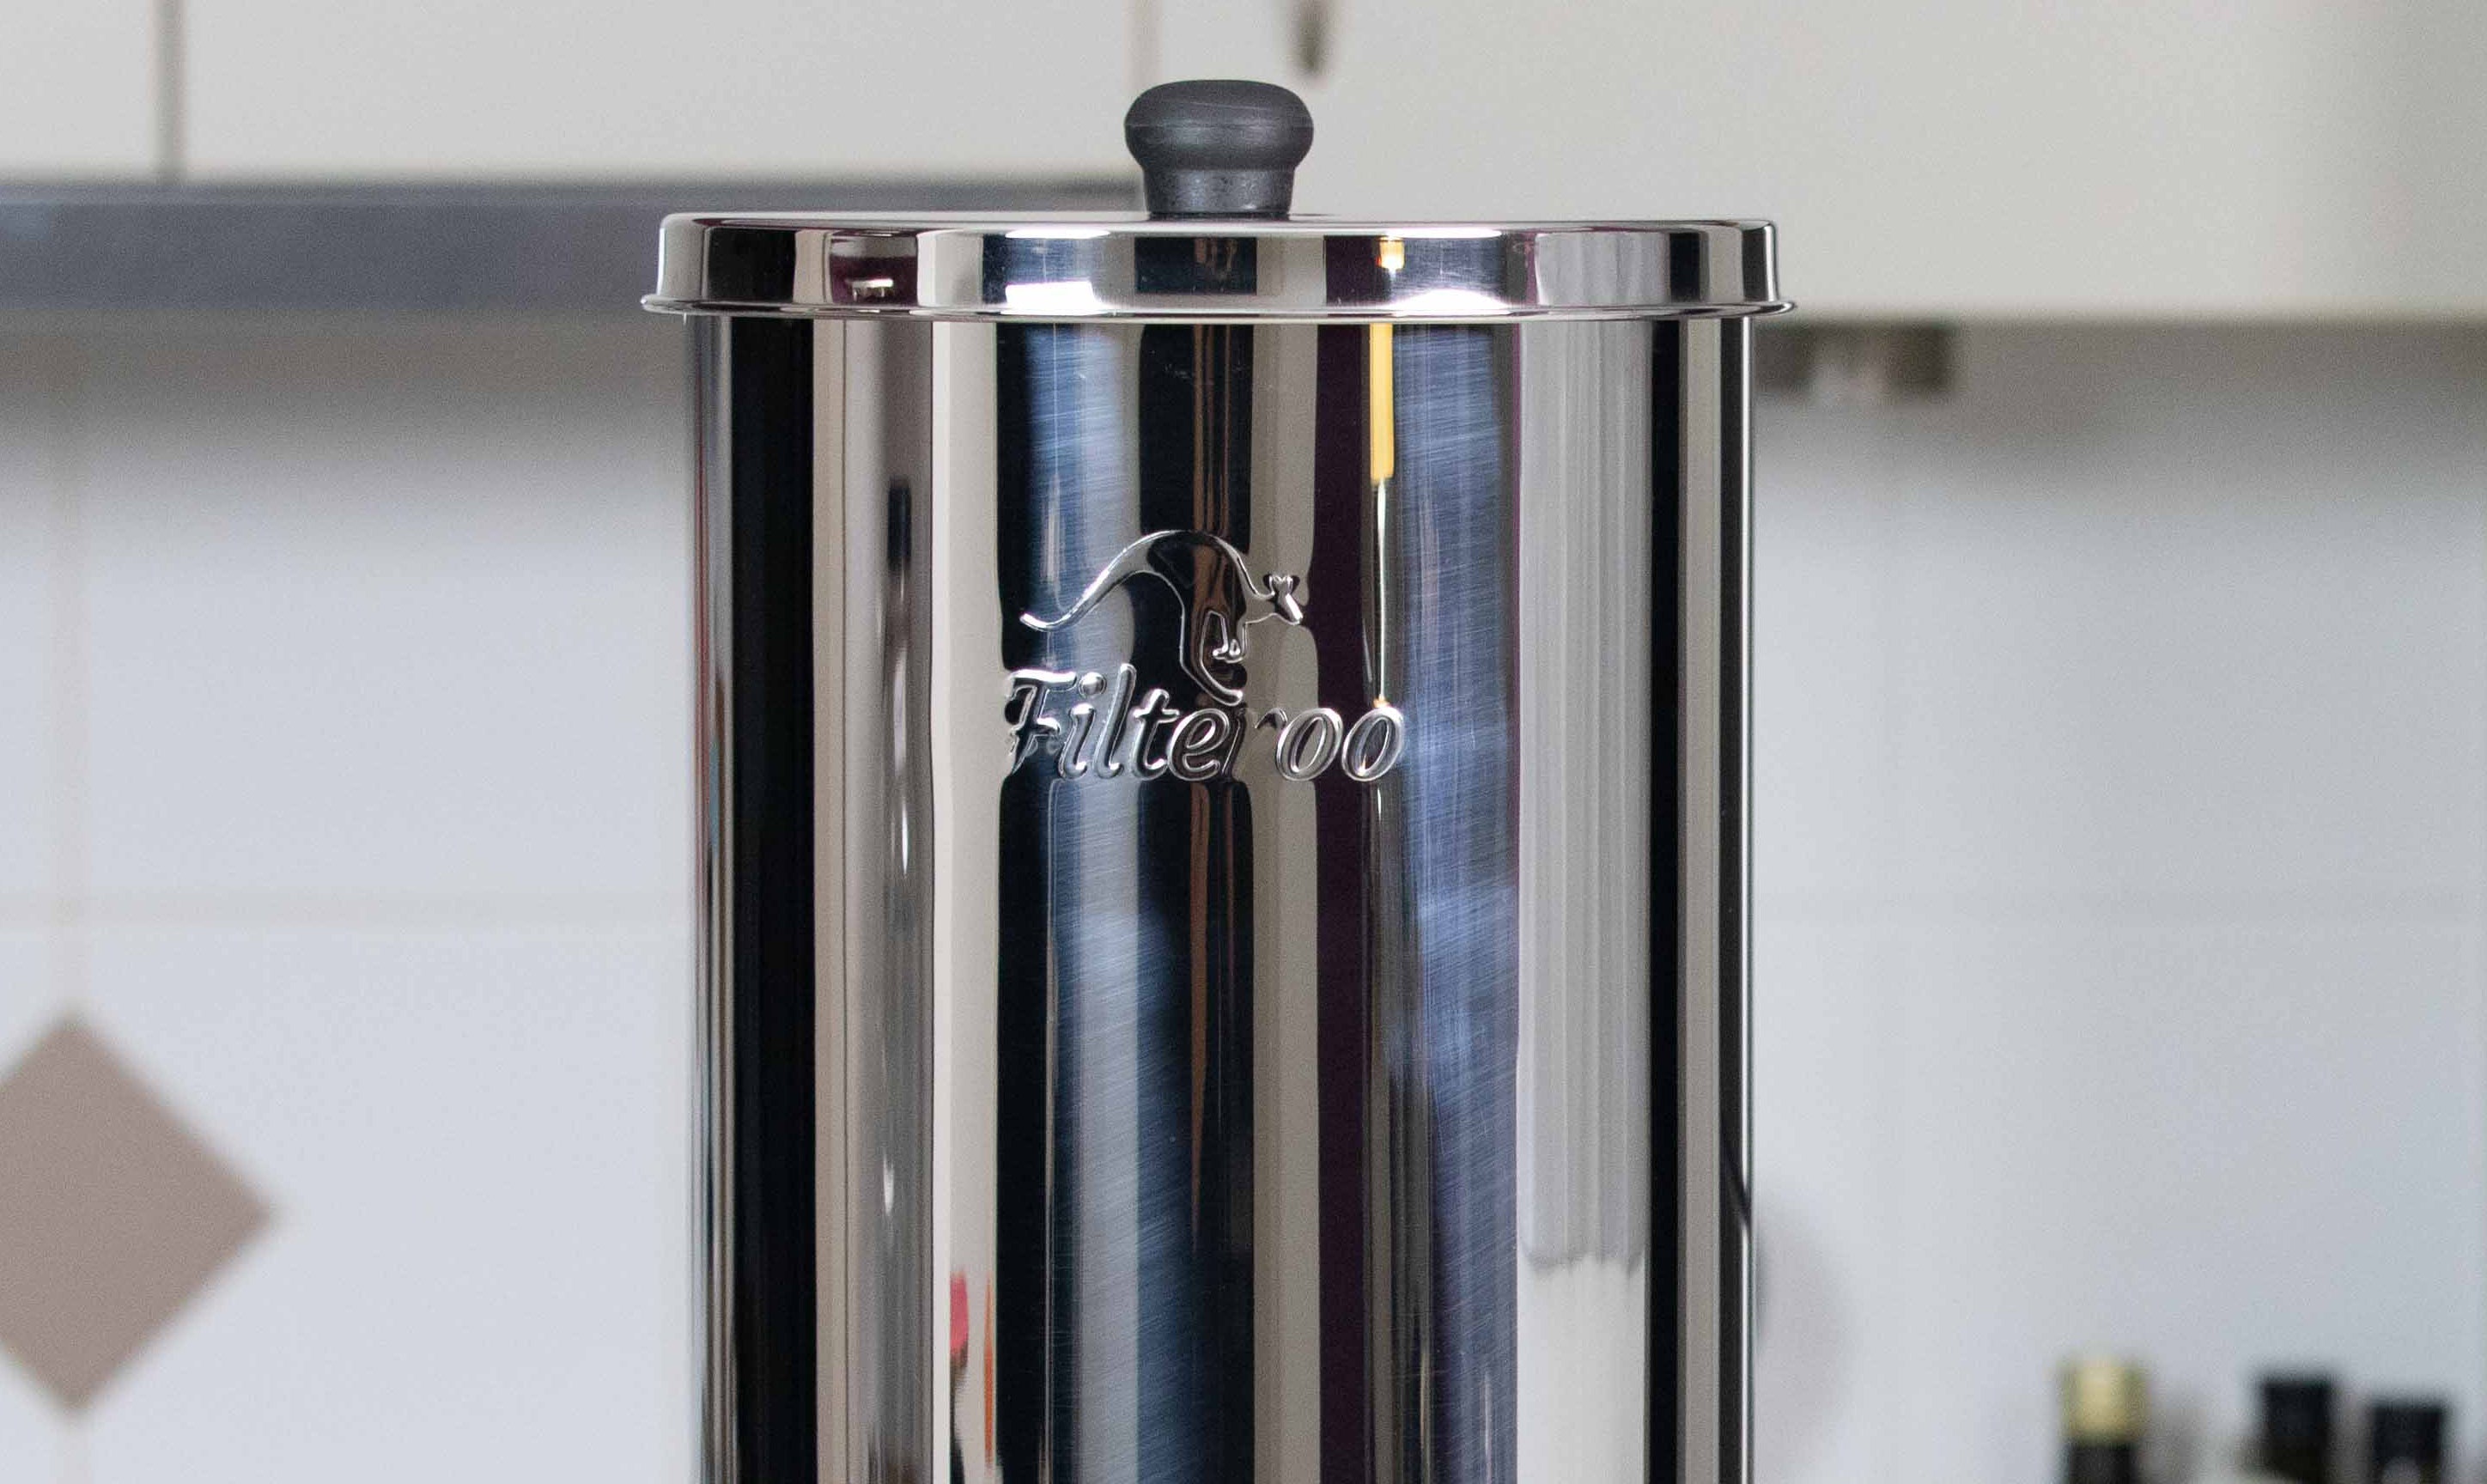 Filteroo® Superoo 16L Stainless Steel Gravity Water Filter - Wholesale